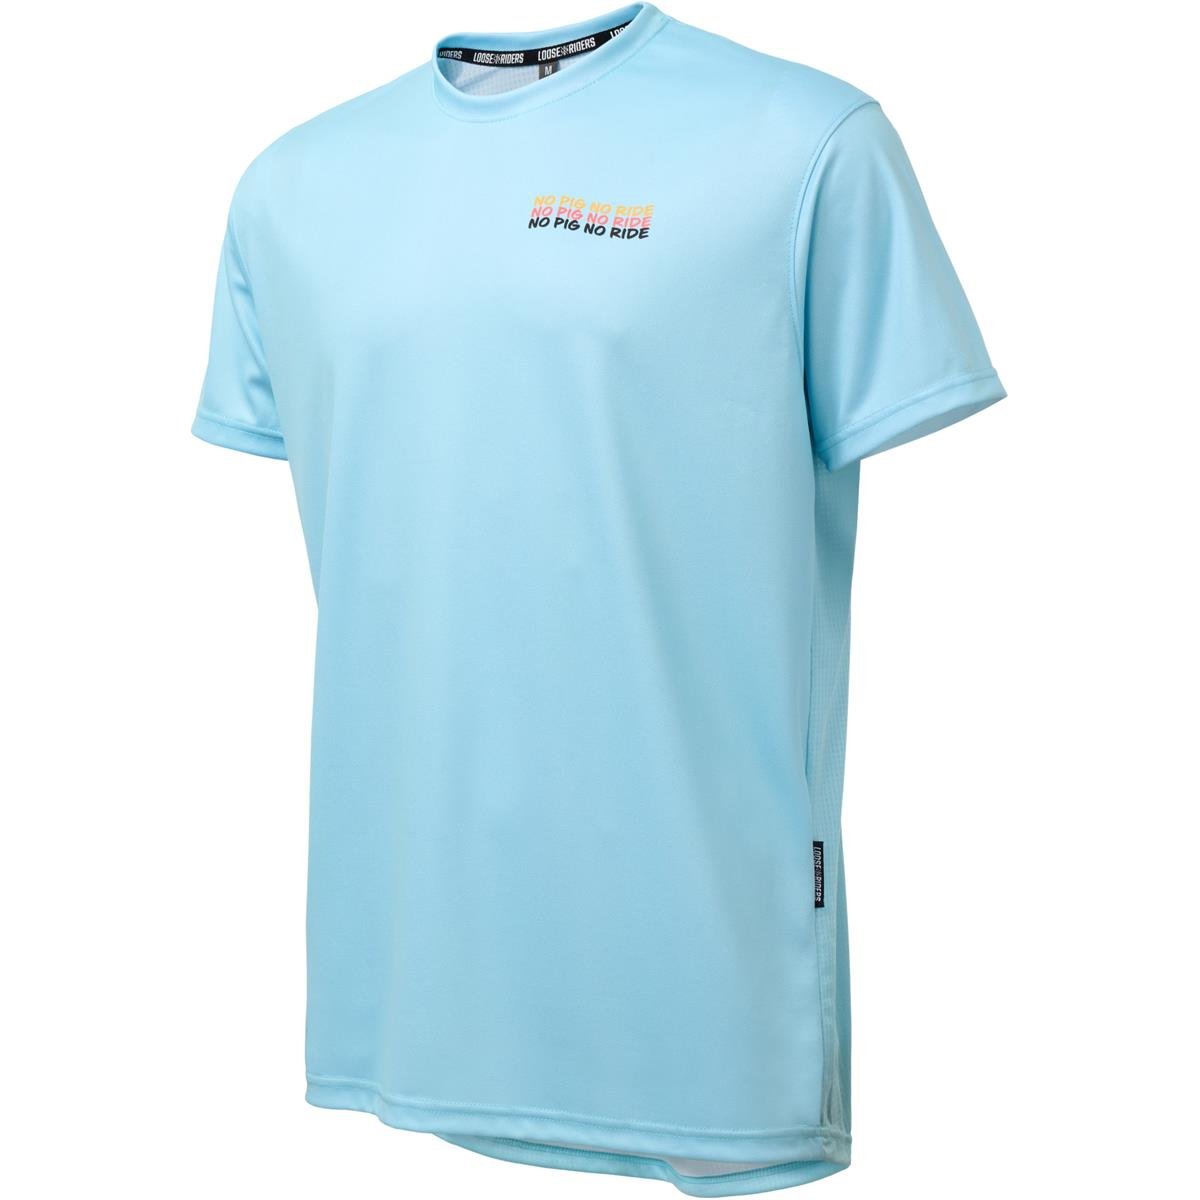 Loose Riders MTB-Jersey Kurzarm Pigs Shred Pigs of Shred - Teal